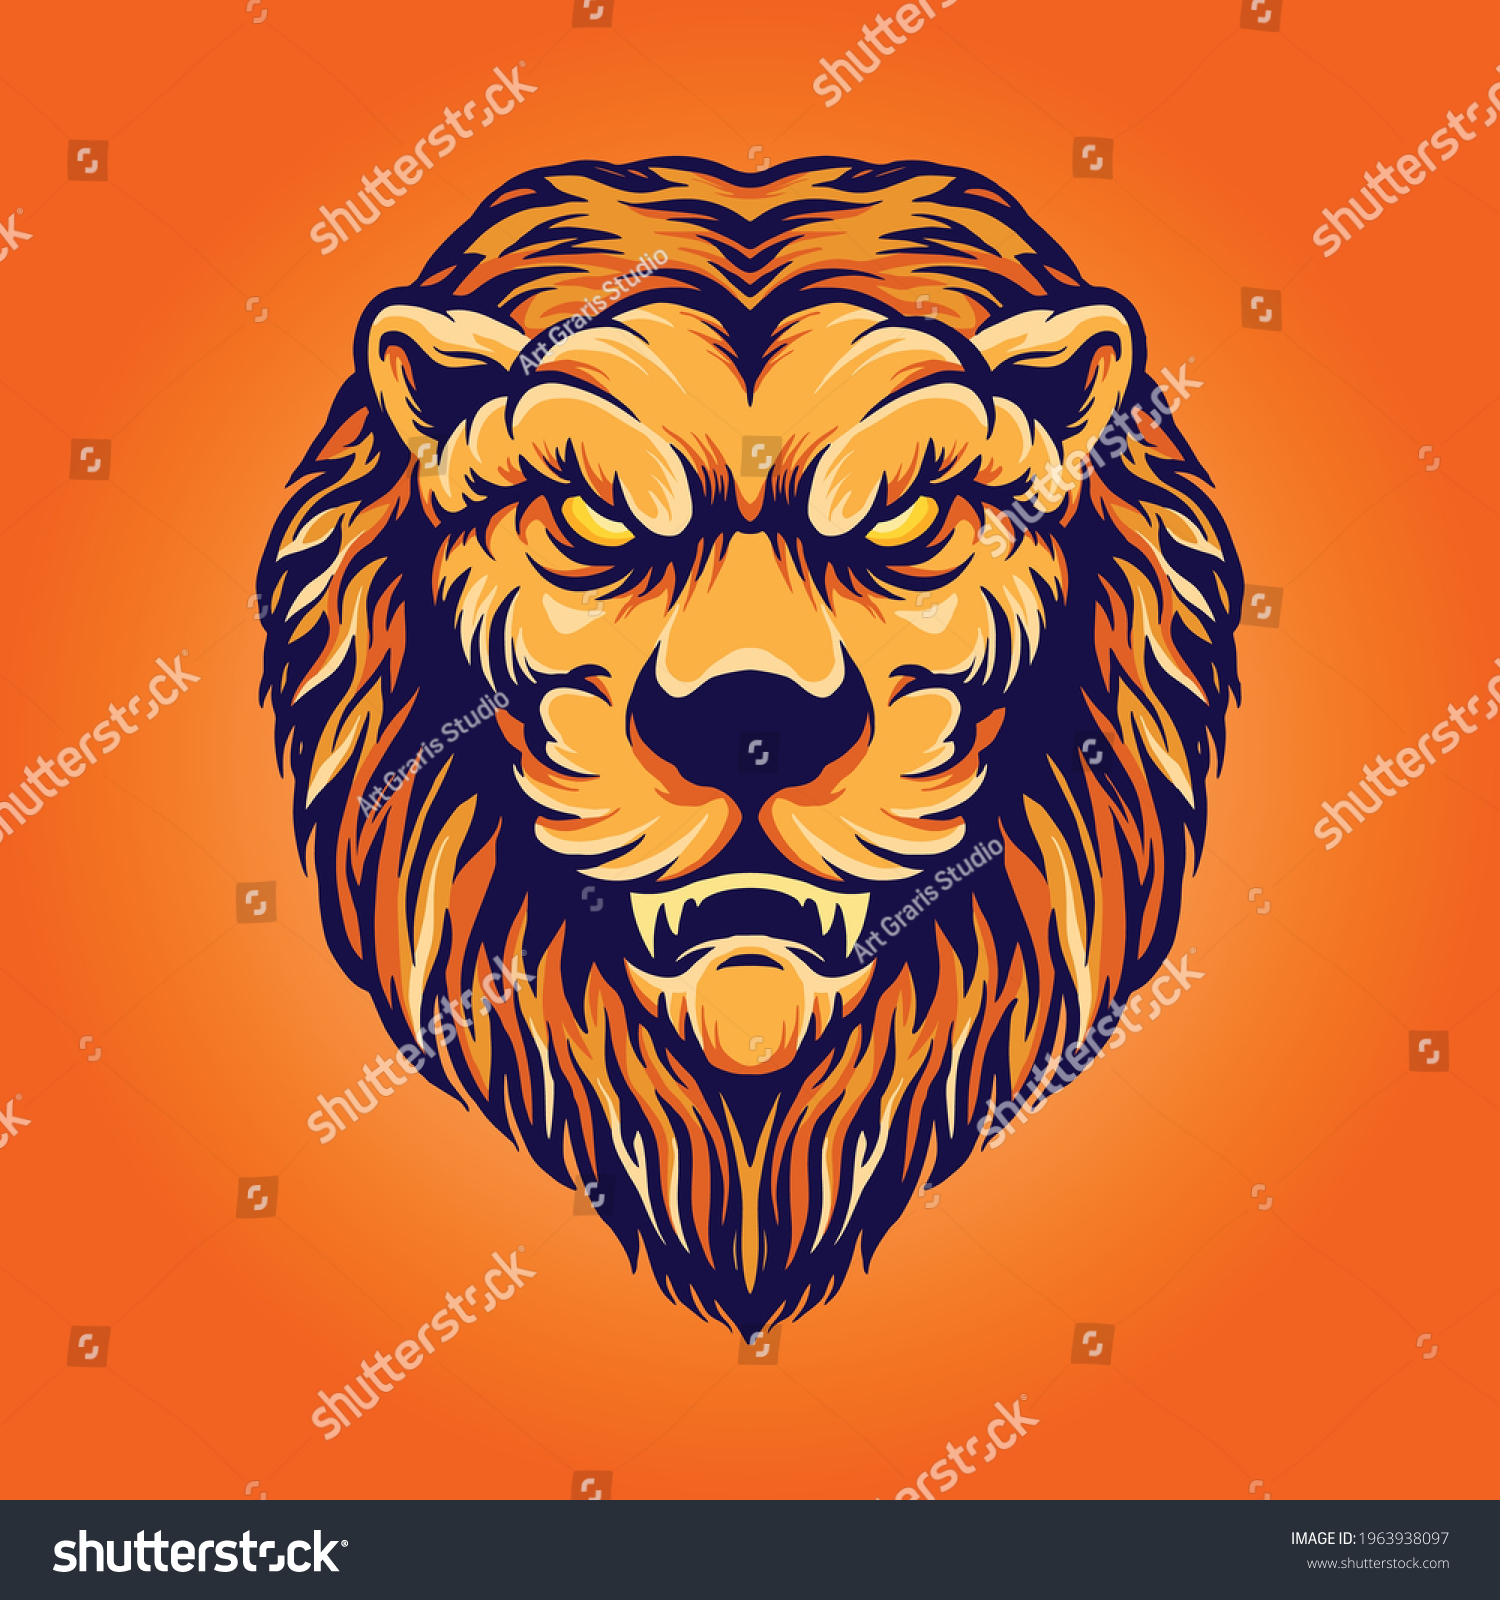 SVG of Lion Head Vintage Character illustrations for your work Logo, mascot merchandise t-shirt, stickers and Label designs, poster, greeting cards advertising business company or brands svg